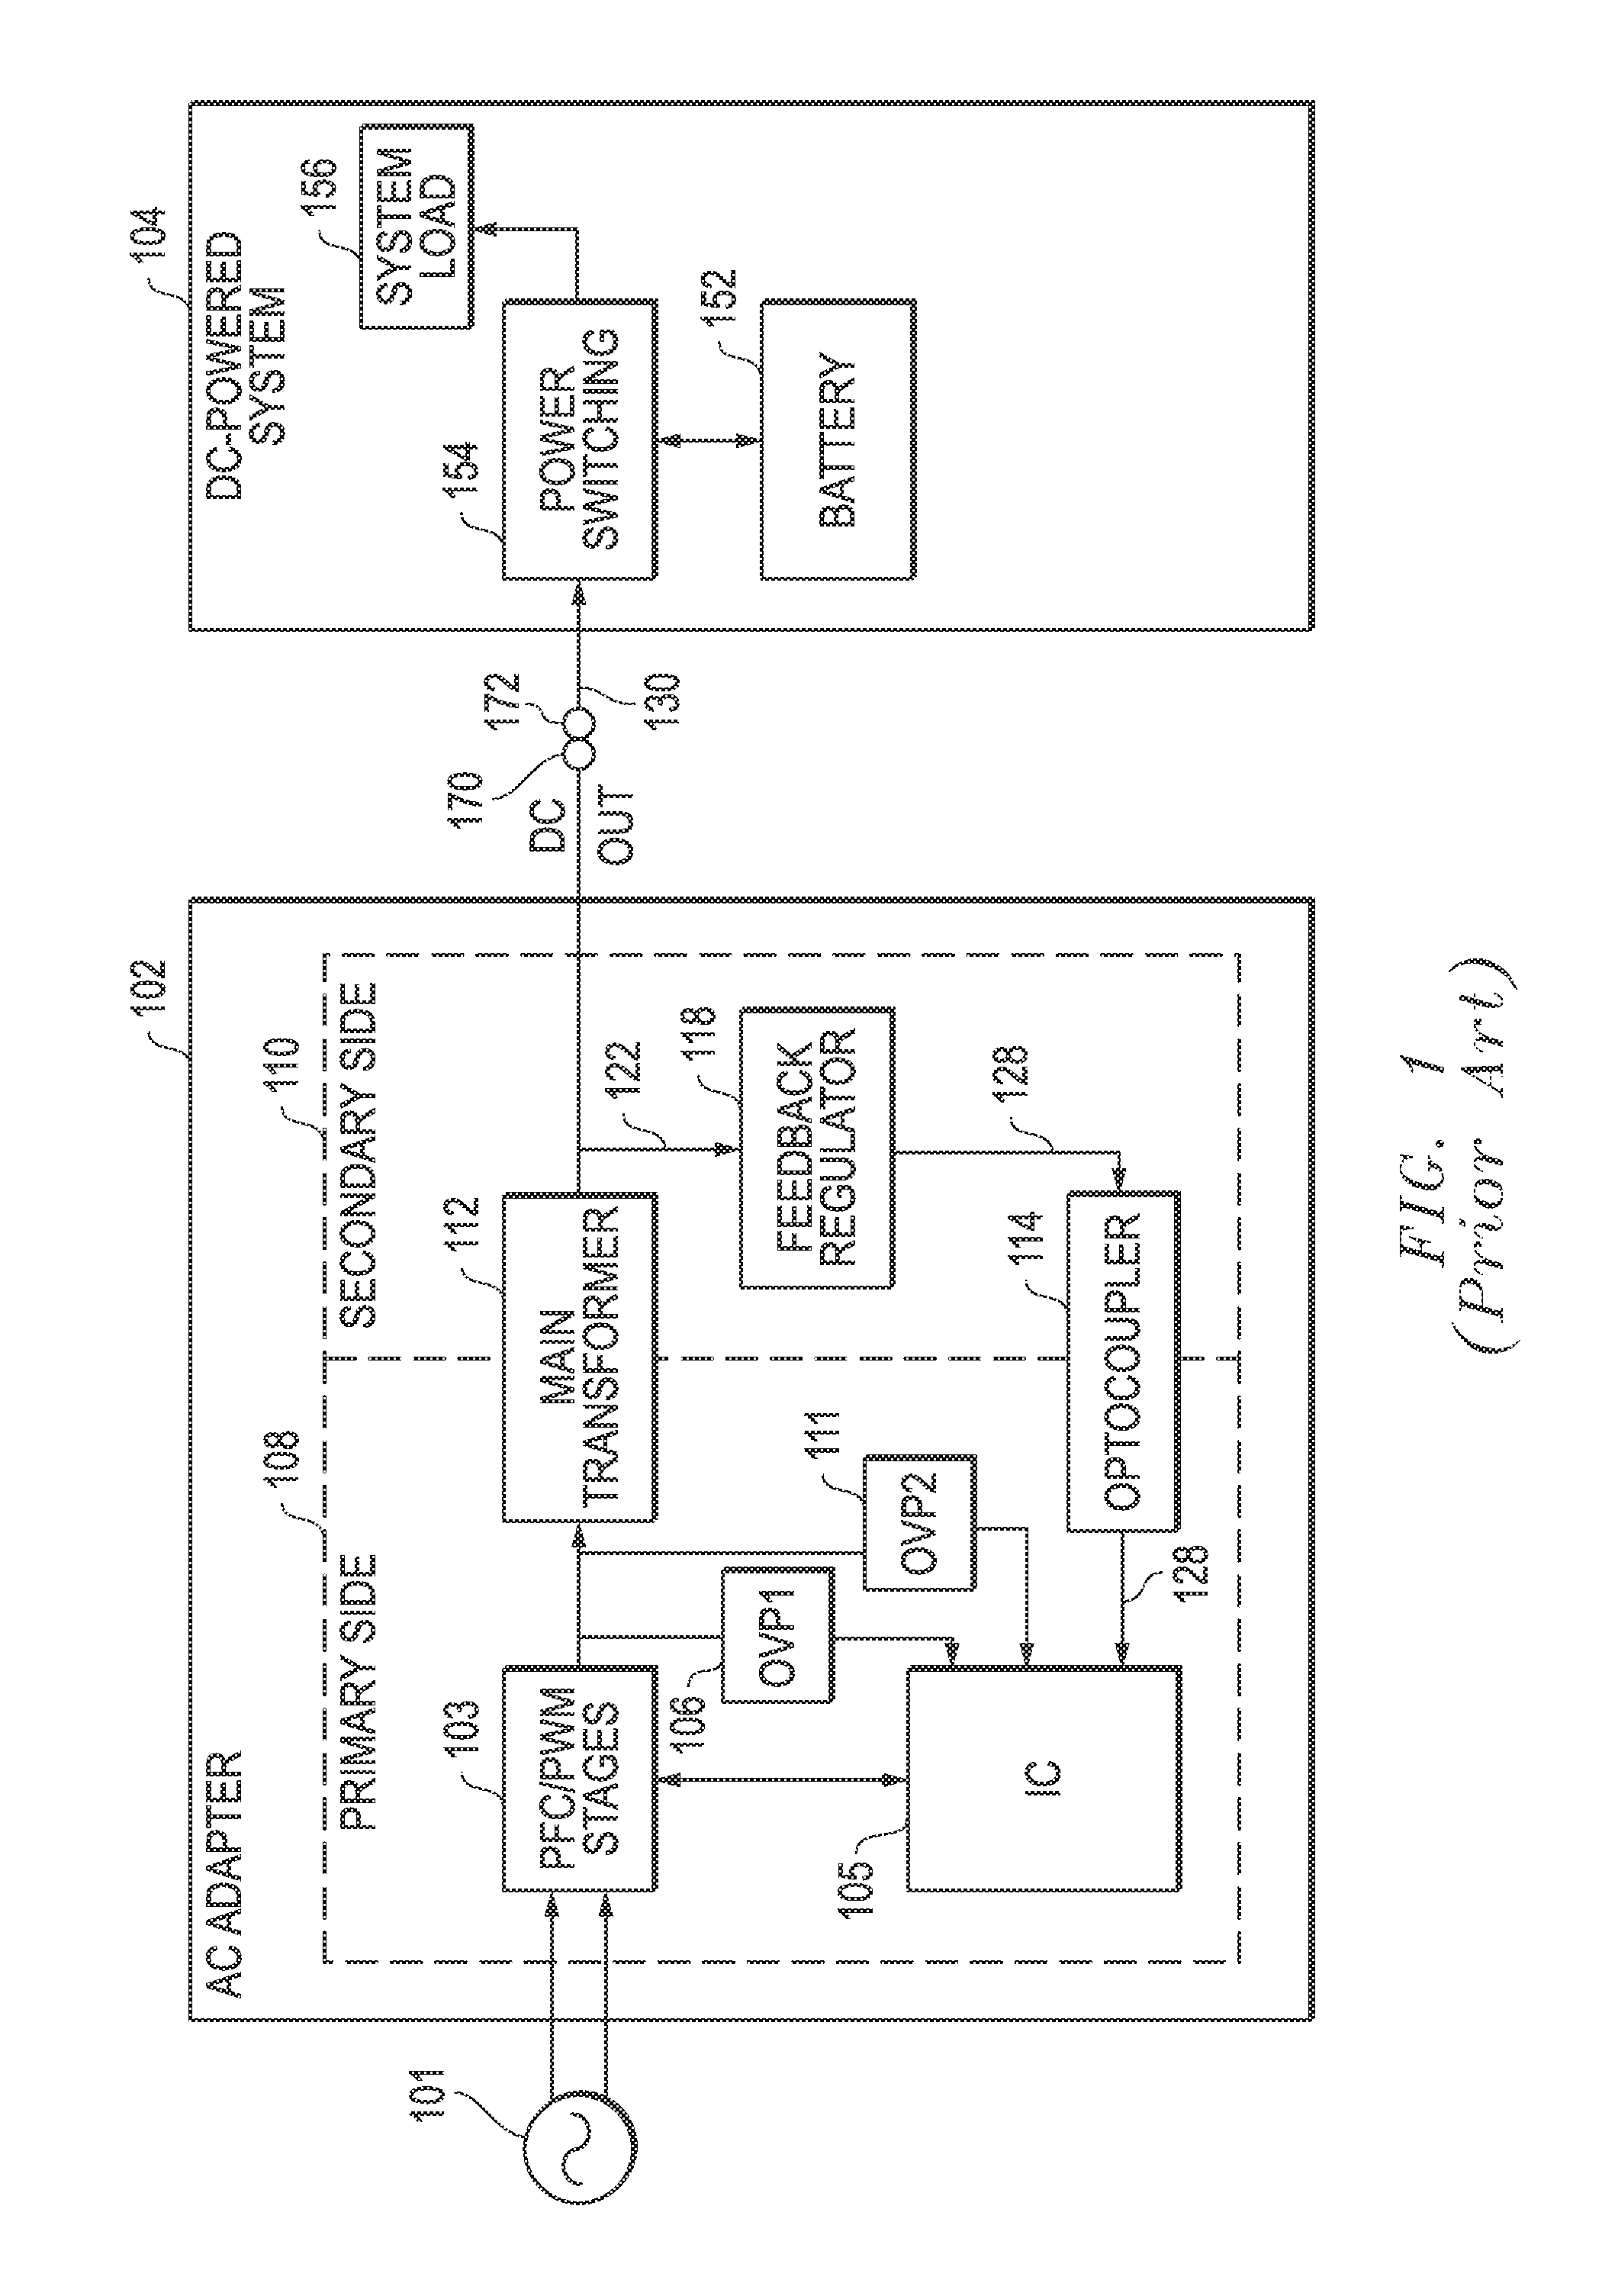 Systems And Methods For Inductive Overvoltage Protection Of PFC Buk Capacitors In Power Supplies